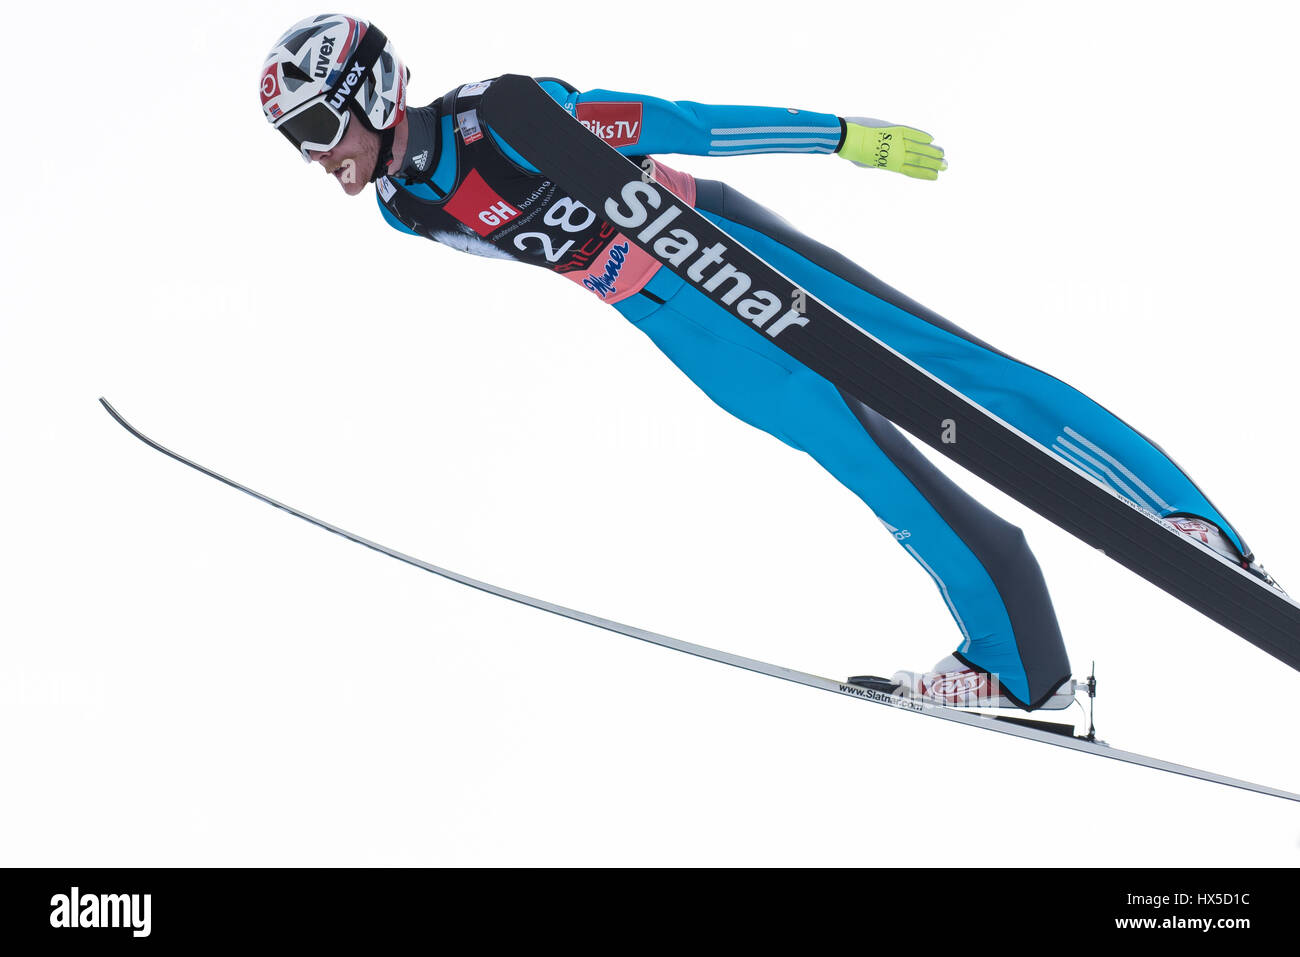 Planica, Slovenia. 24th Mar, 2017. Johansson Robert of Norway competes during Planica FIS Ski Jumping World Cup finals on March 24, 2017 in Planica, Slovenia Credit: Rok Rakun/Pacific Press/Alamy Live News Stock Photo